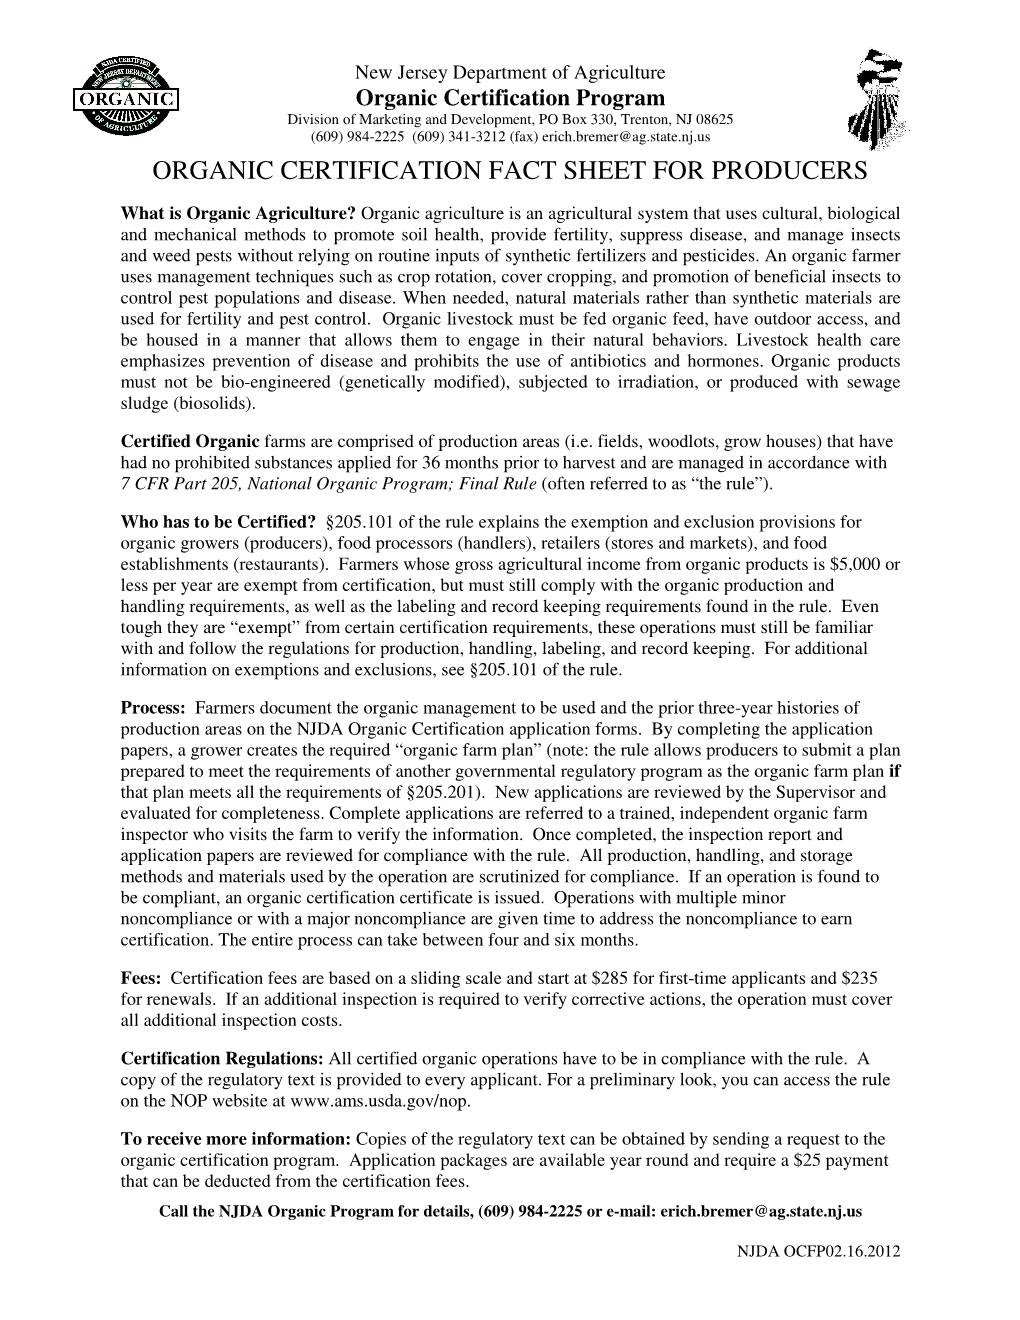 Organic Certification Fact Sheet for Producers